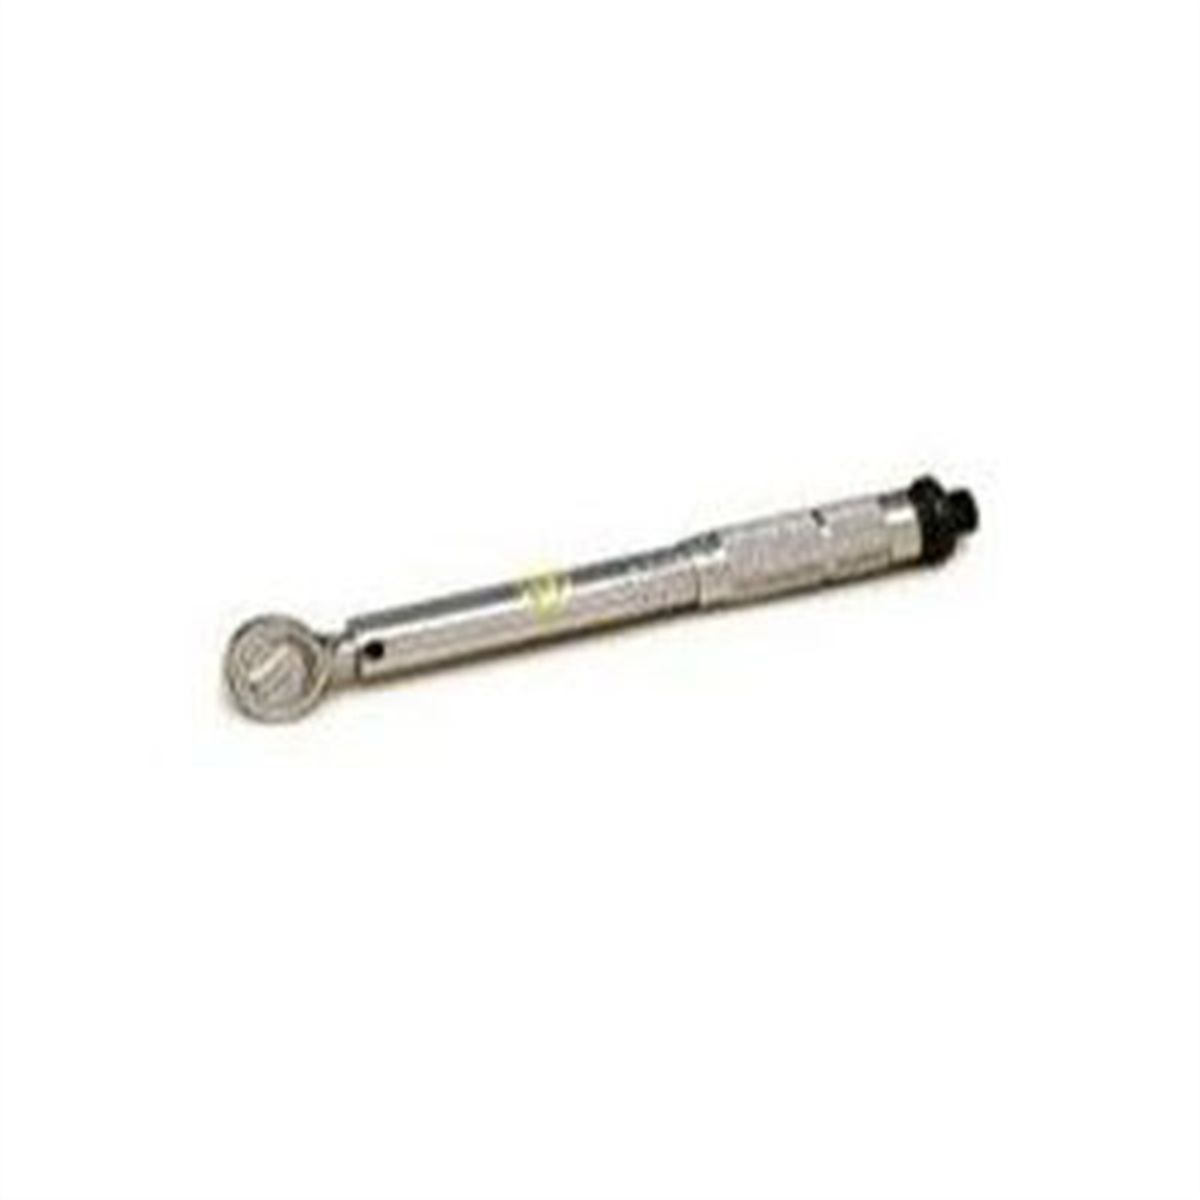 3/8" Dr Click Torque Wrench